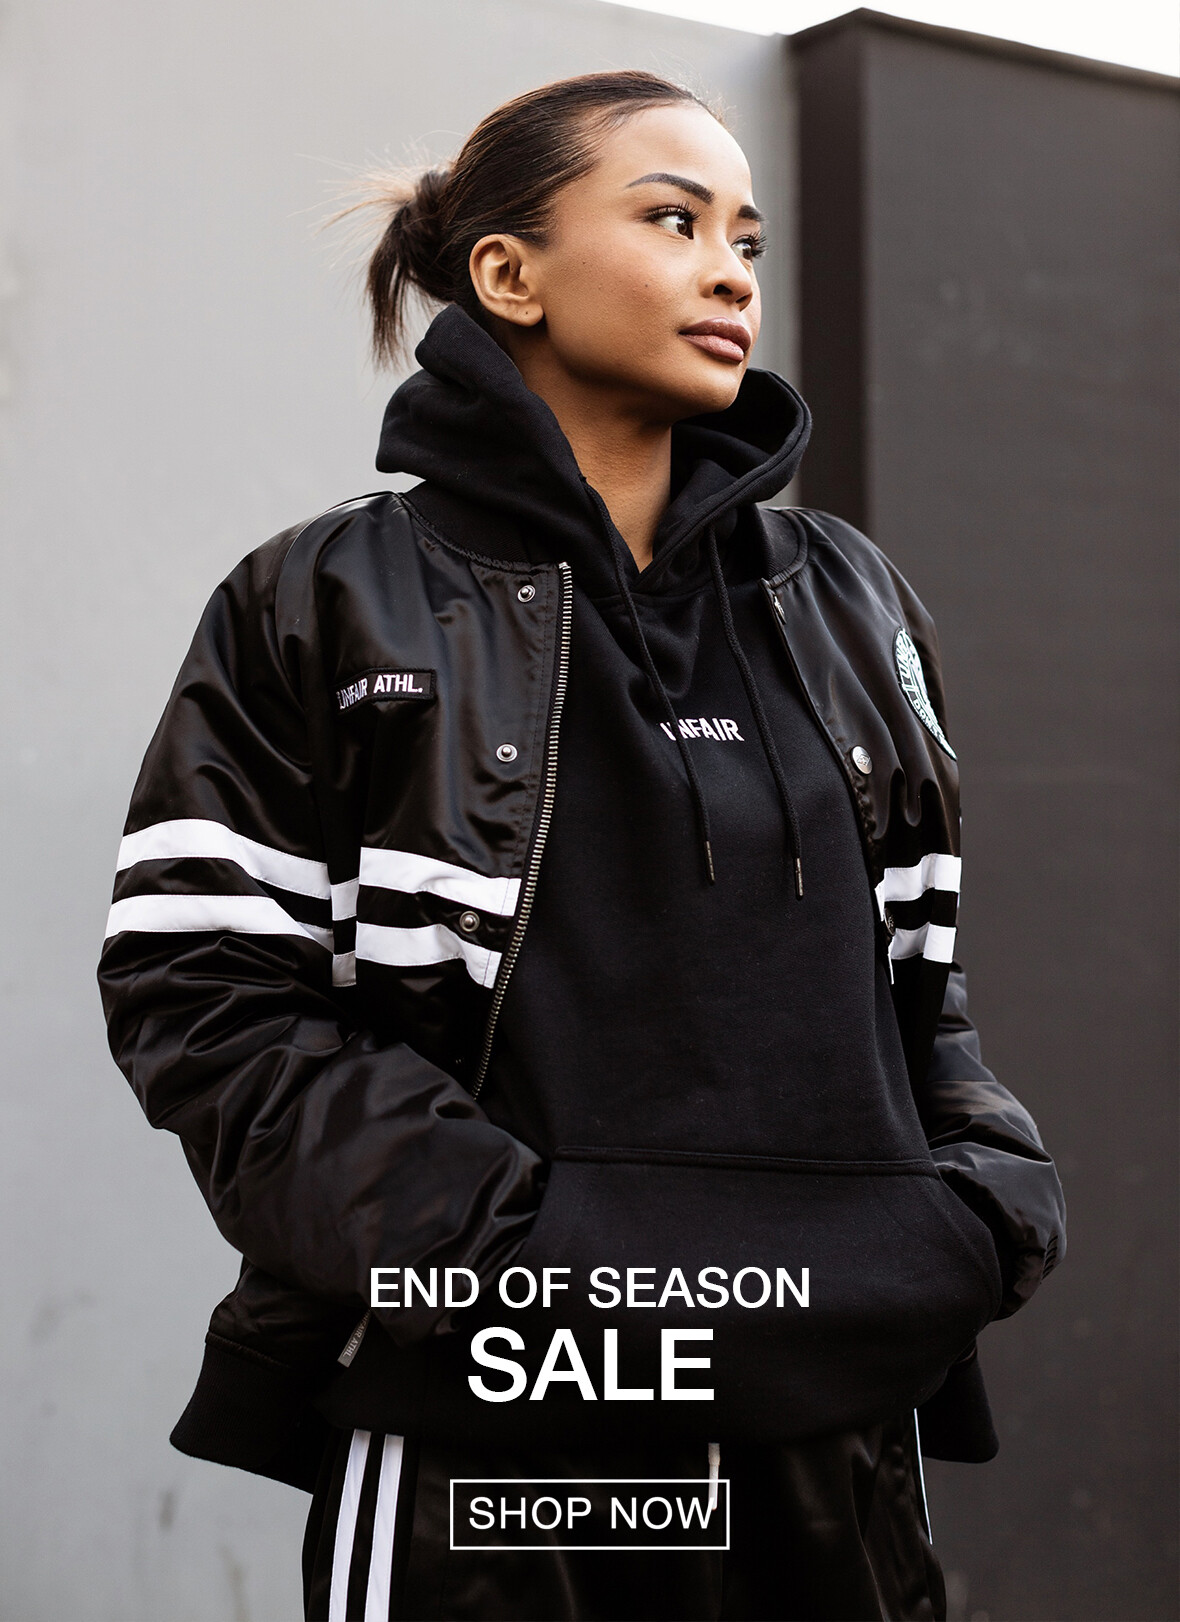 END OF SEASON SALE - UP TO 50% OFF